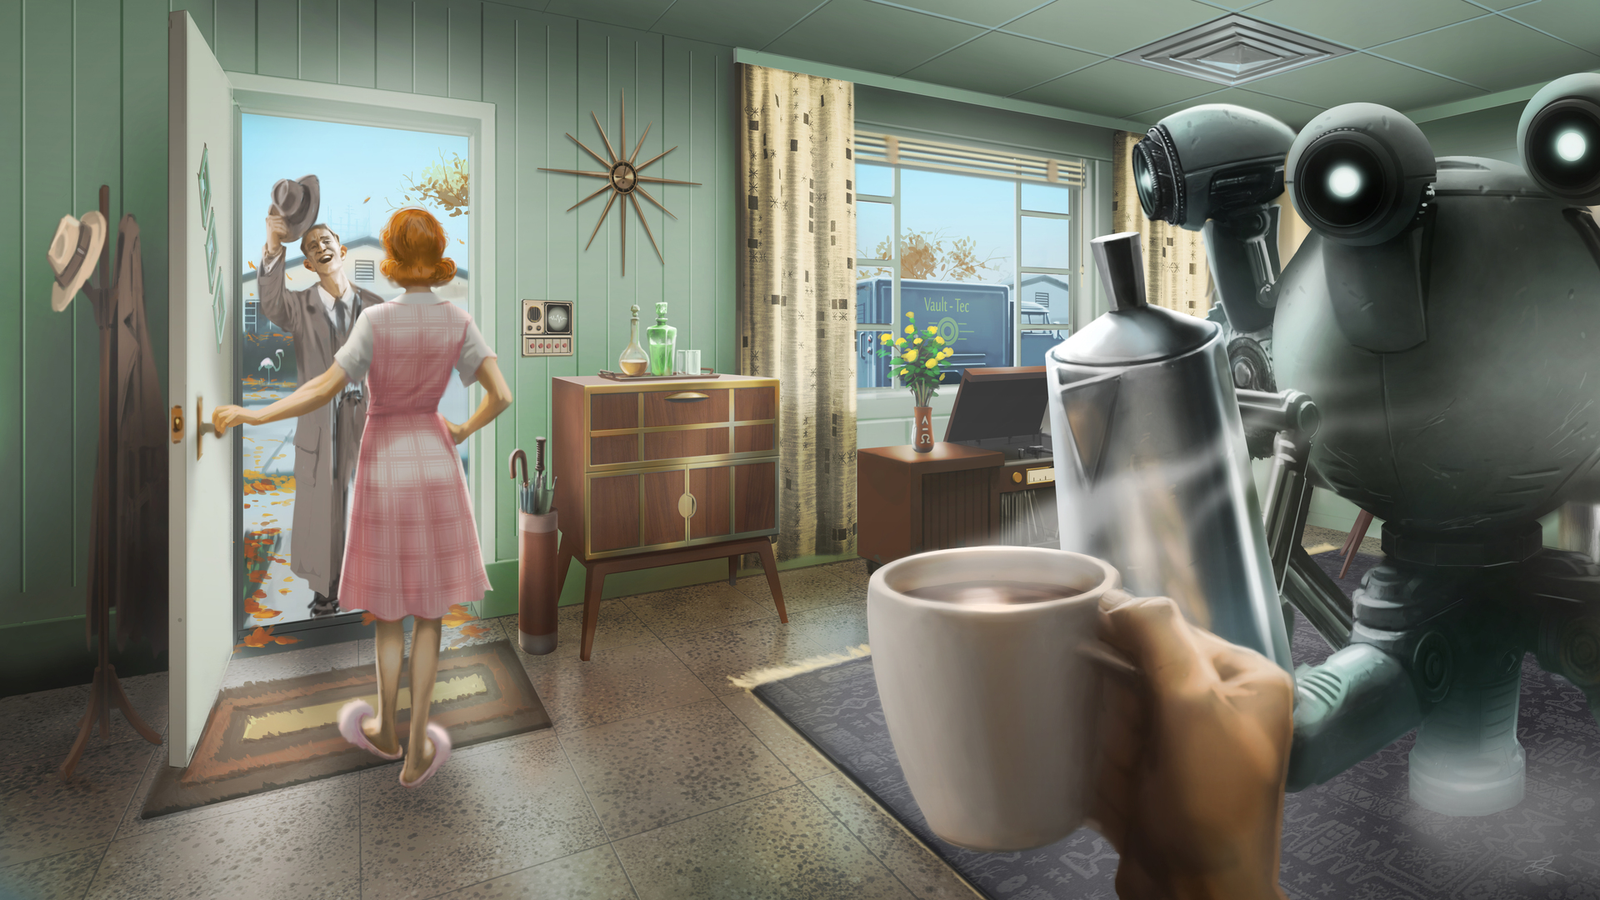 The next gen Fallout 4 update has references to New Vegas 2